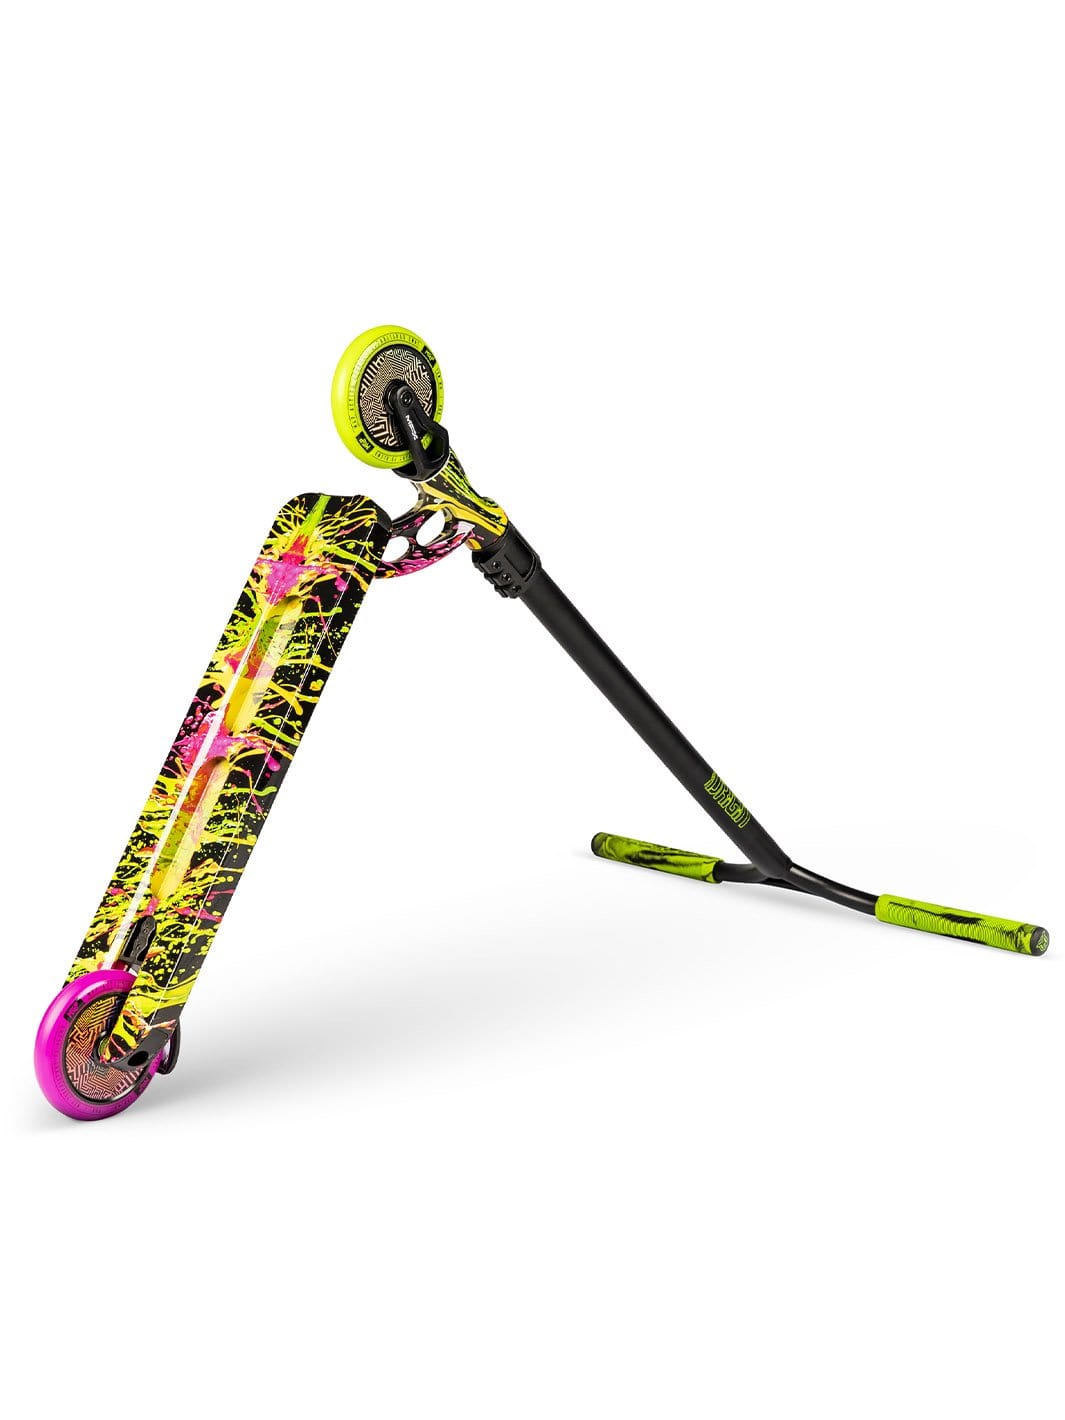 Liquified Extreme Pro Stunt Scooter Lightweight Smooth Riding Skatepark